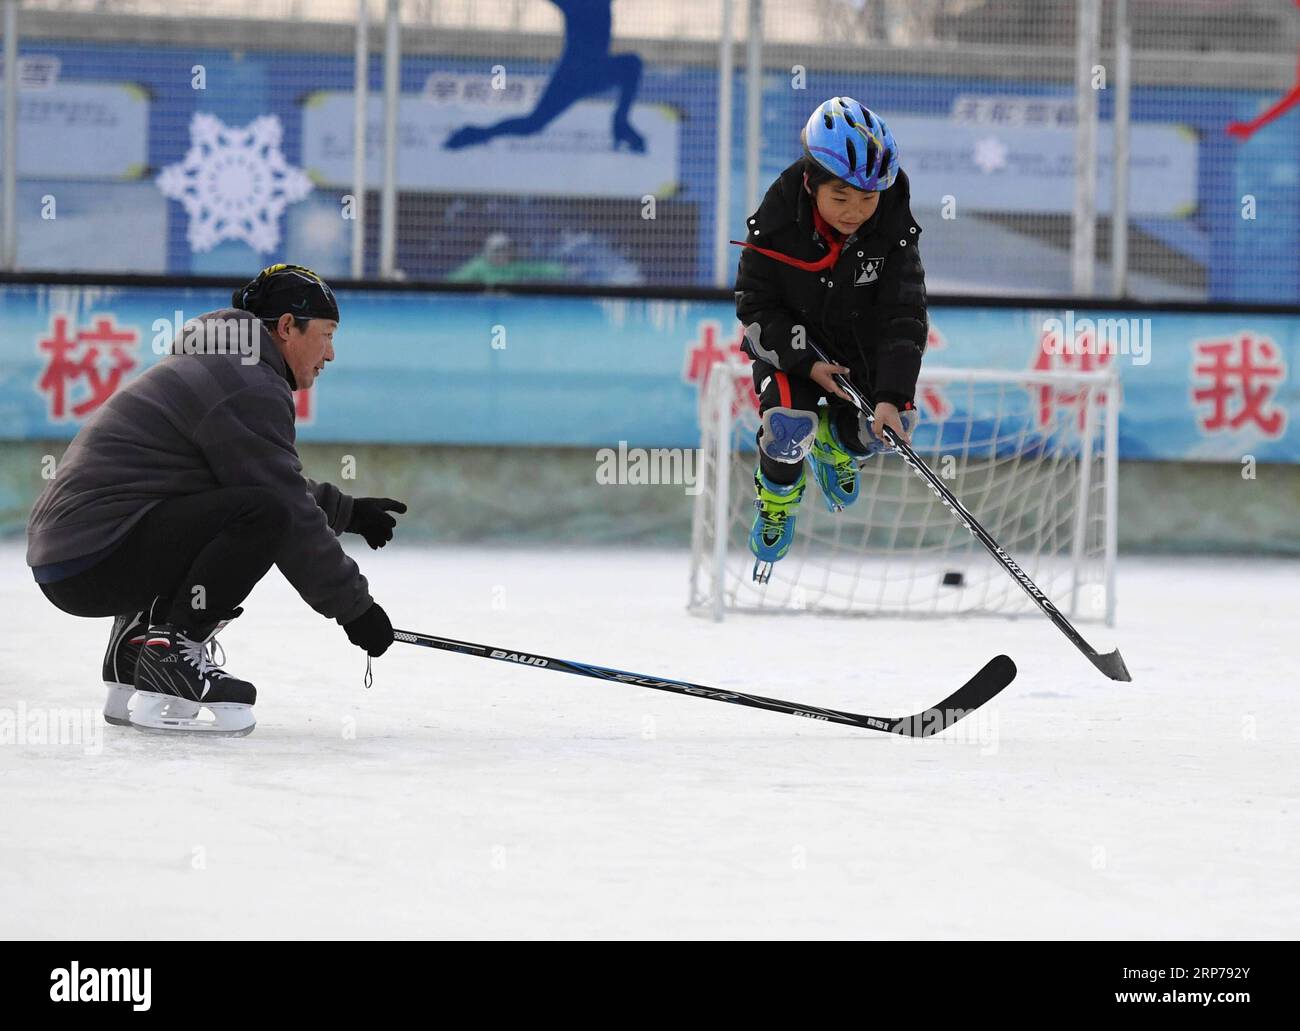 (190201) -- BEIJING, Feb. 1, 2019 (Xinhua) -- Photo taken on Jan. 9, 2019 shows coach Li Chunyu (L) and his student during an ice hockey training session at Taipingzhuang Central Primary School, in Yanqing District of Beijing, capital of China. Taipingzhuang Central Primary School situated right at the foot of Xiaohaituo Mountains, where the venues for Beijing 2022 Winter Olympic games are under construction. Teachers of Taipingzhuang Central Primary School have turned an experimental farmland into a seasonal skating rink for the pupils here to learn skating since 2016. The school hired a expe Stock Photo